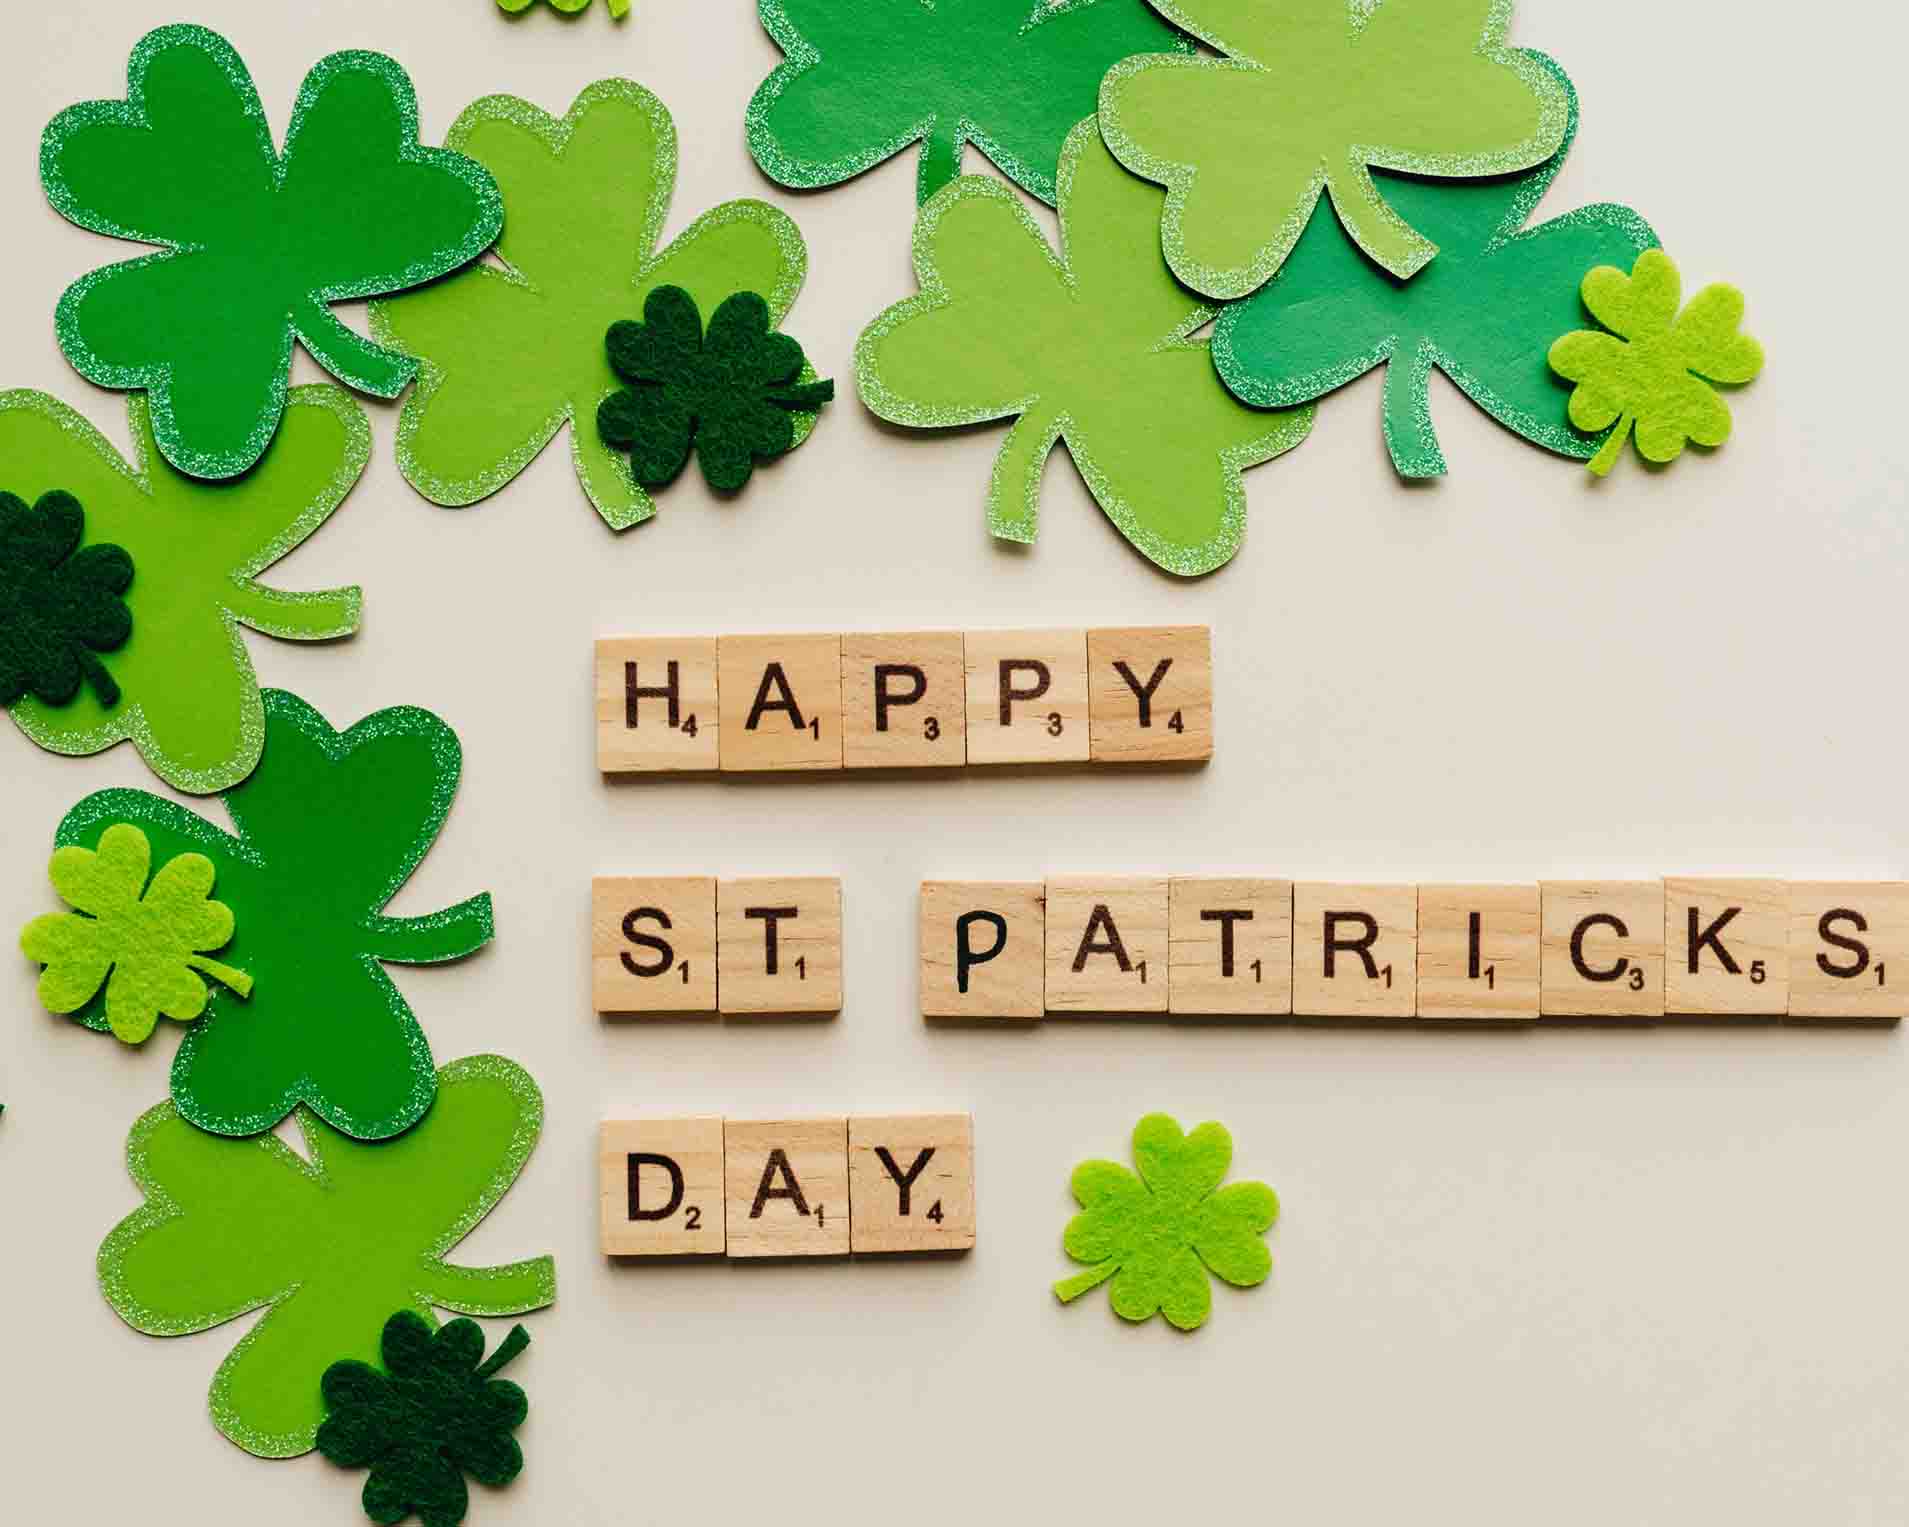 Scrabble letters saying Happy St. Patricks Day and green paper clovers around it